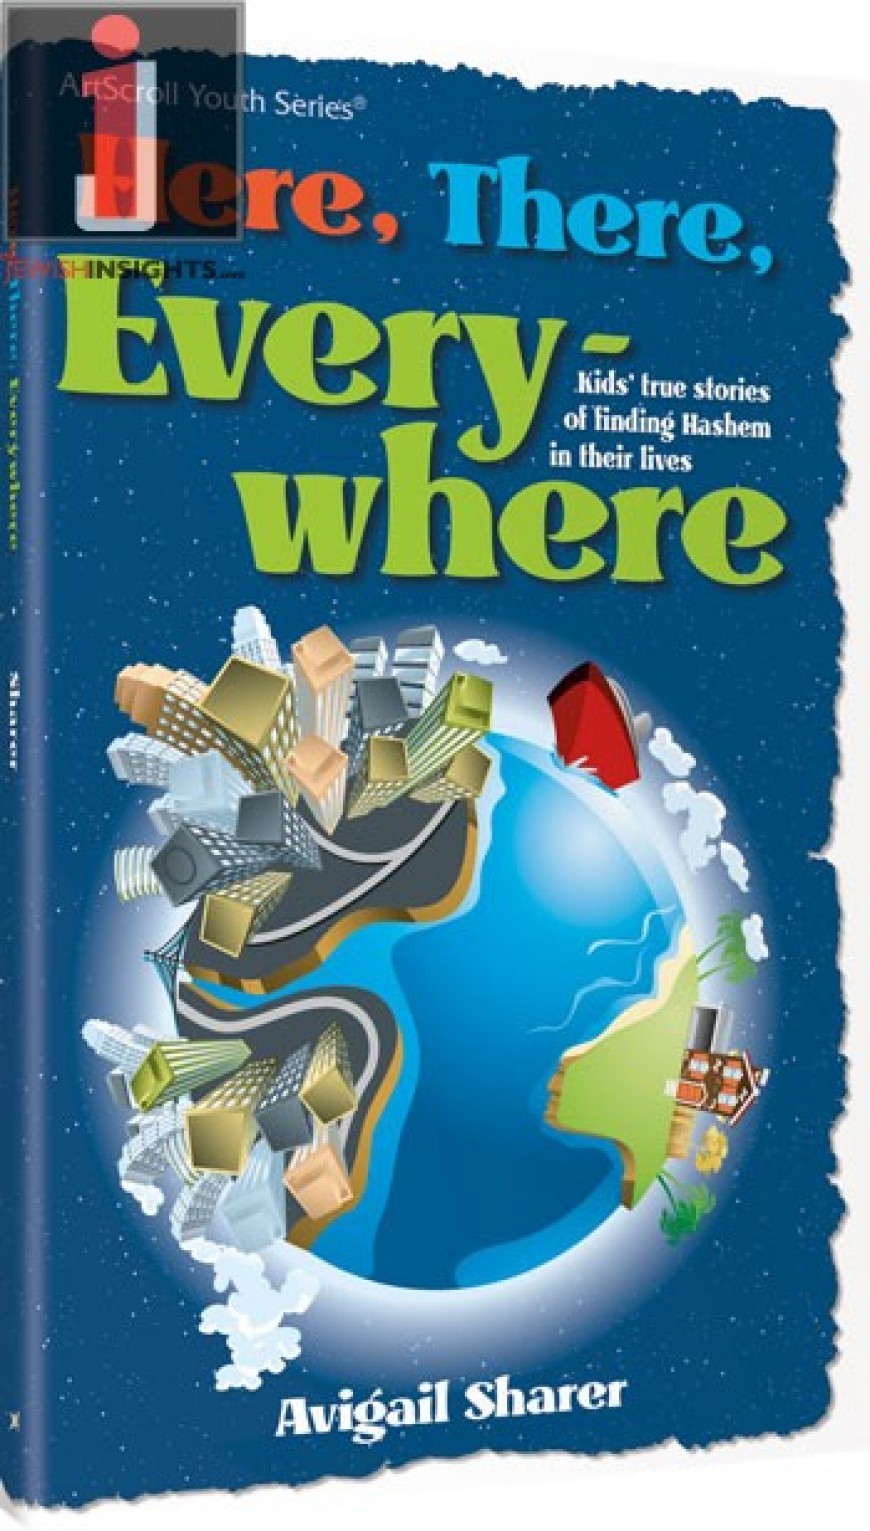 HERE, THERE, EVERYWHERE – Kids’ true stories of finding Hashem in their lives